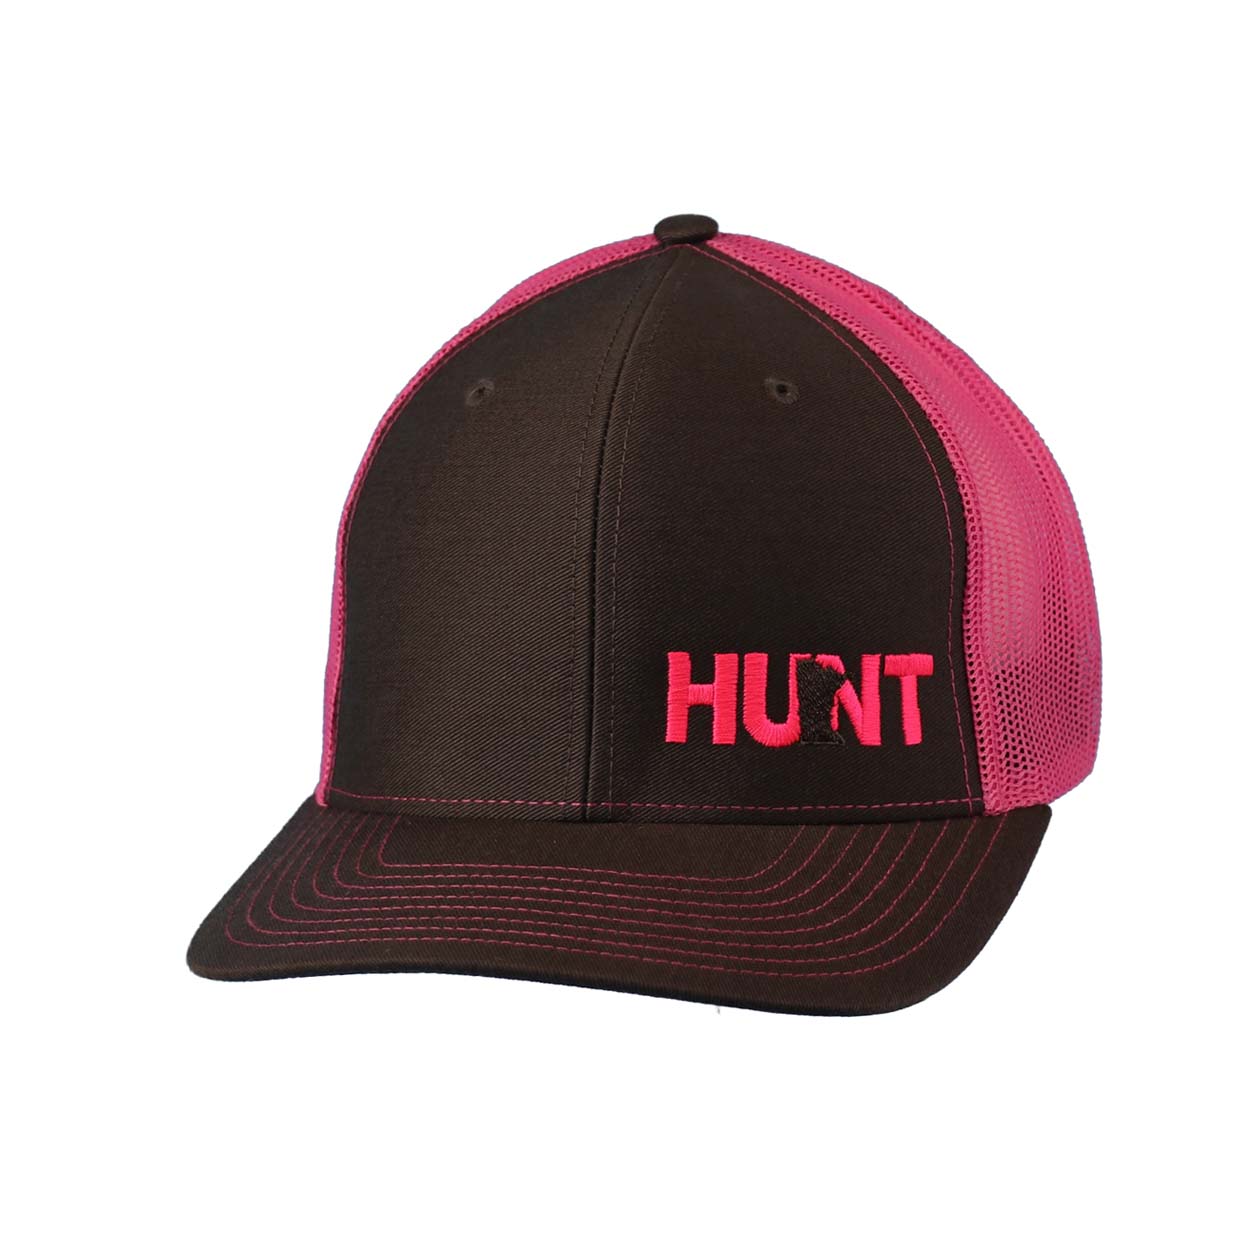 Hunt Minnesota Night Out Embroidered Snapback Trucker Hat Gray/Pink